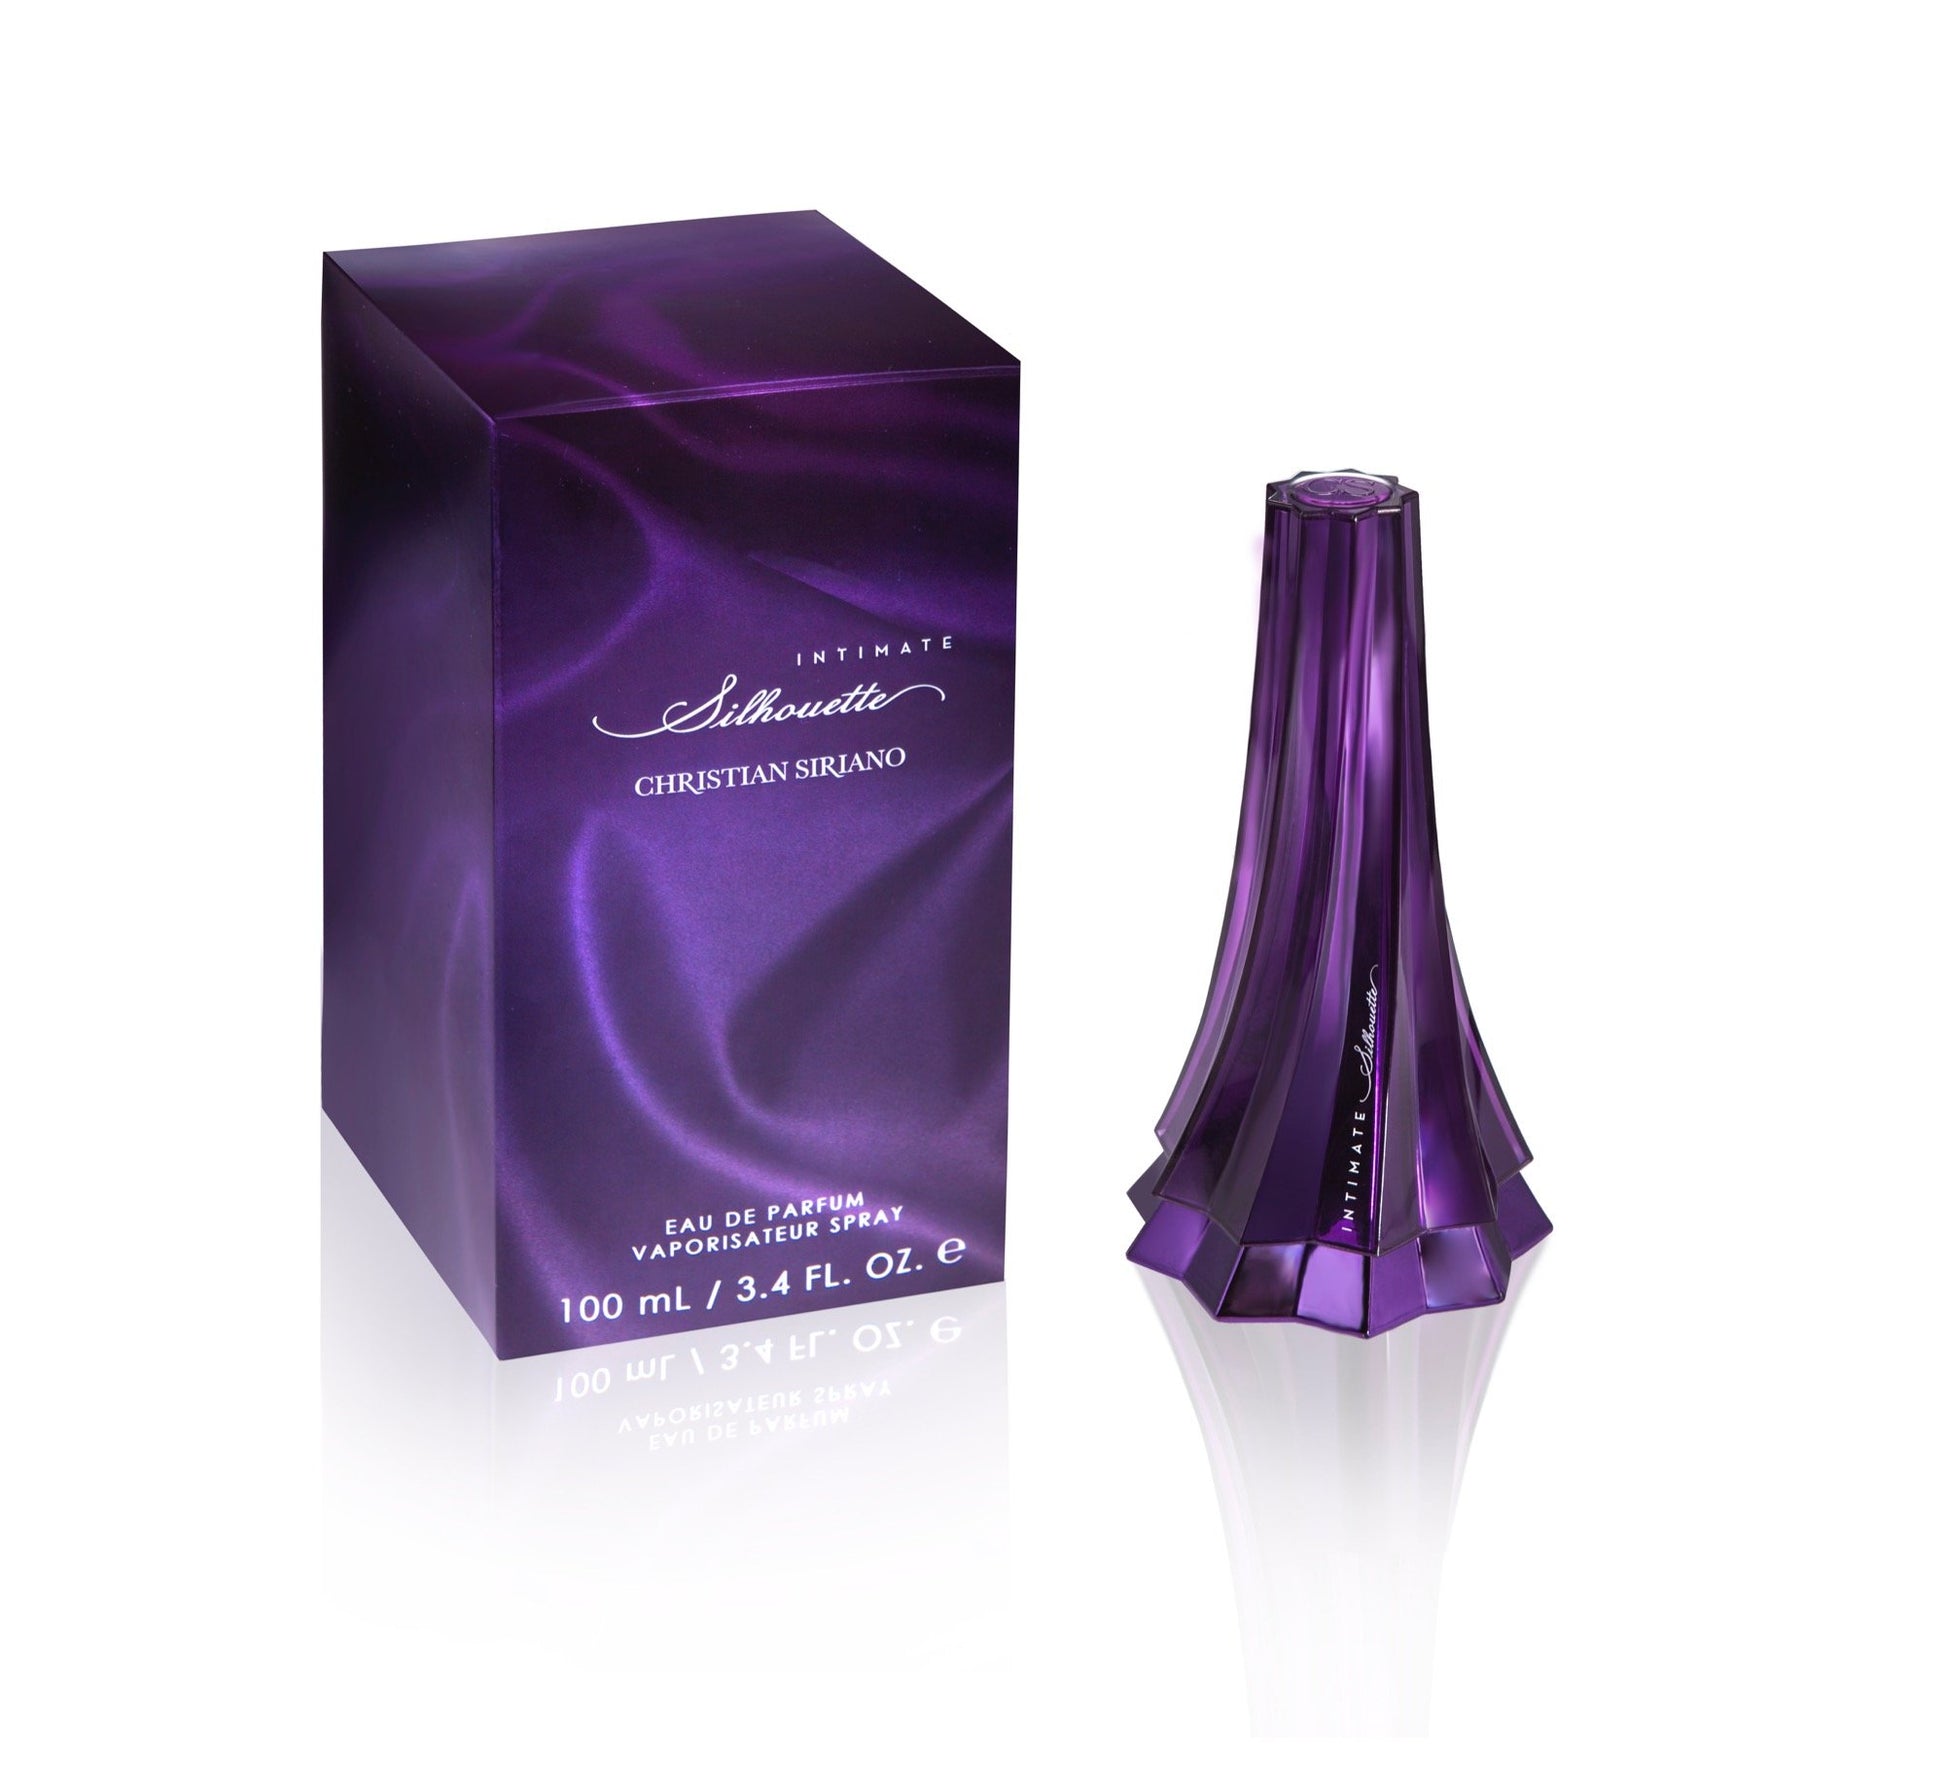 Intimate Silhouette Eau de Parfum Spray for Women by Christian Siriano, Product image 1